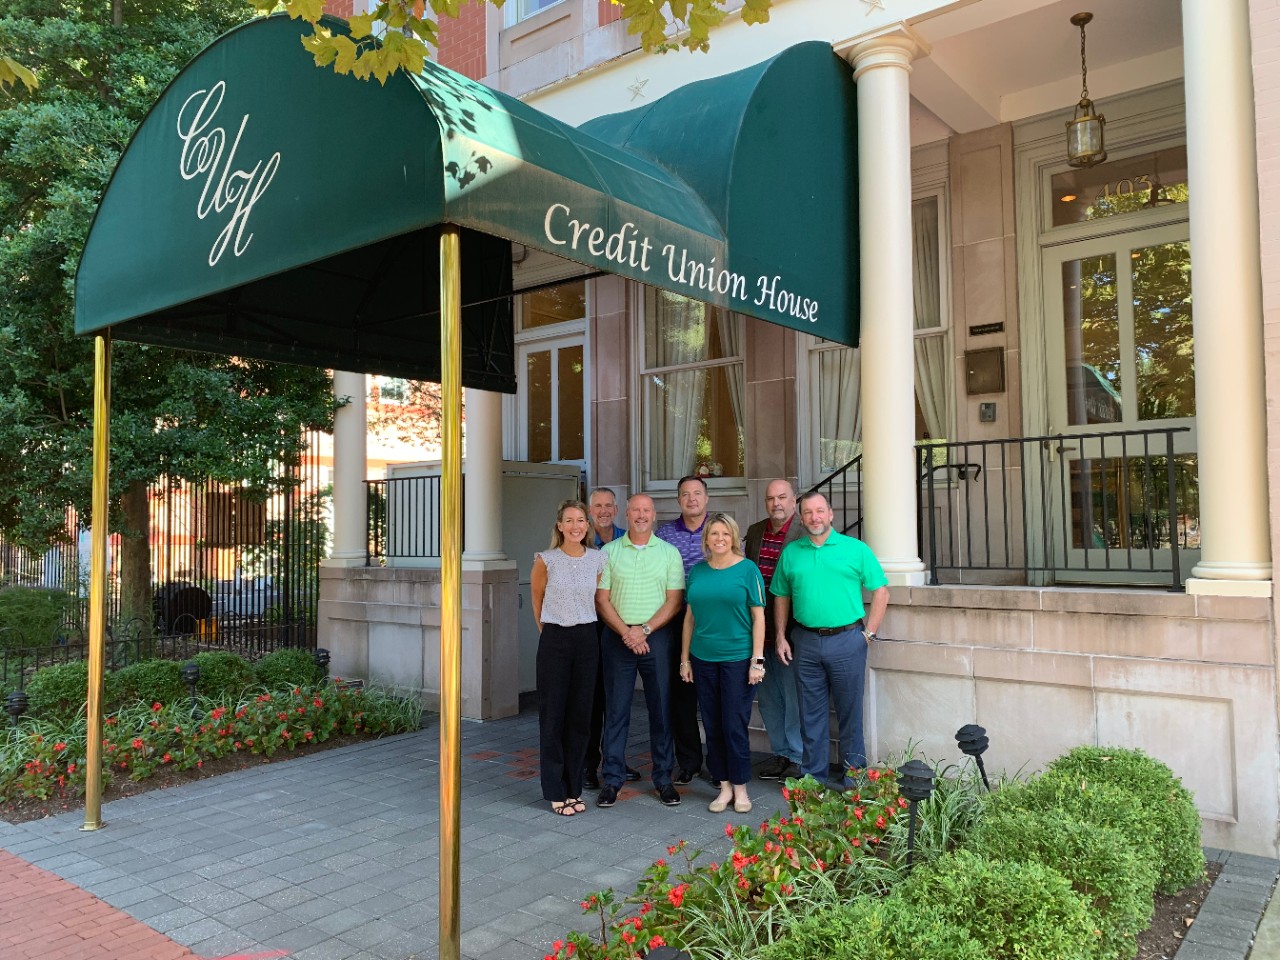 Credit Union House's green awning is a recognizable landmark